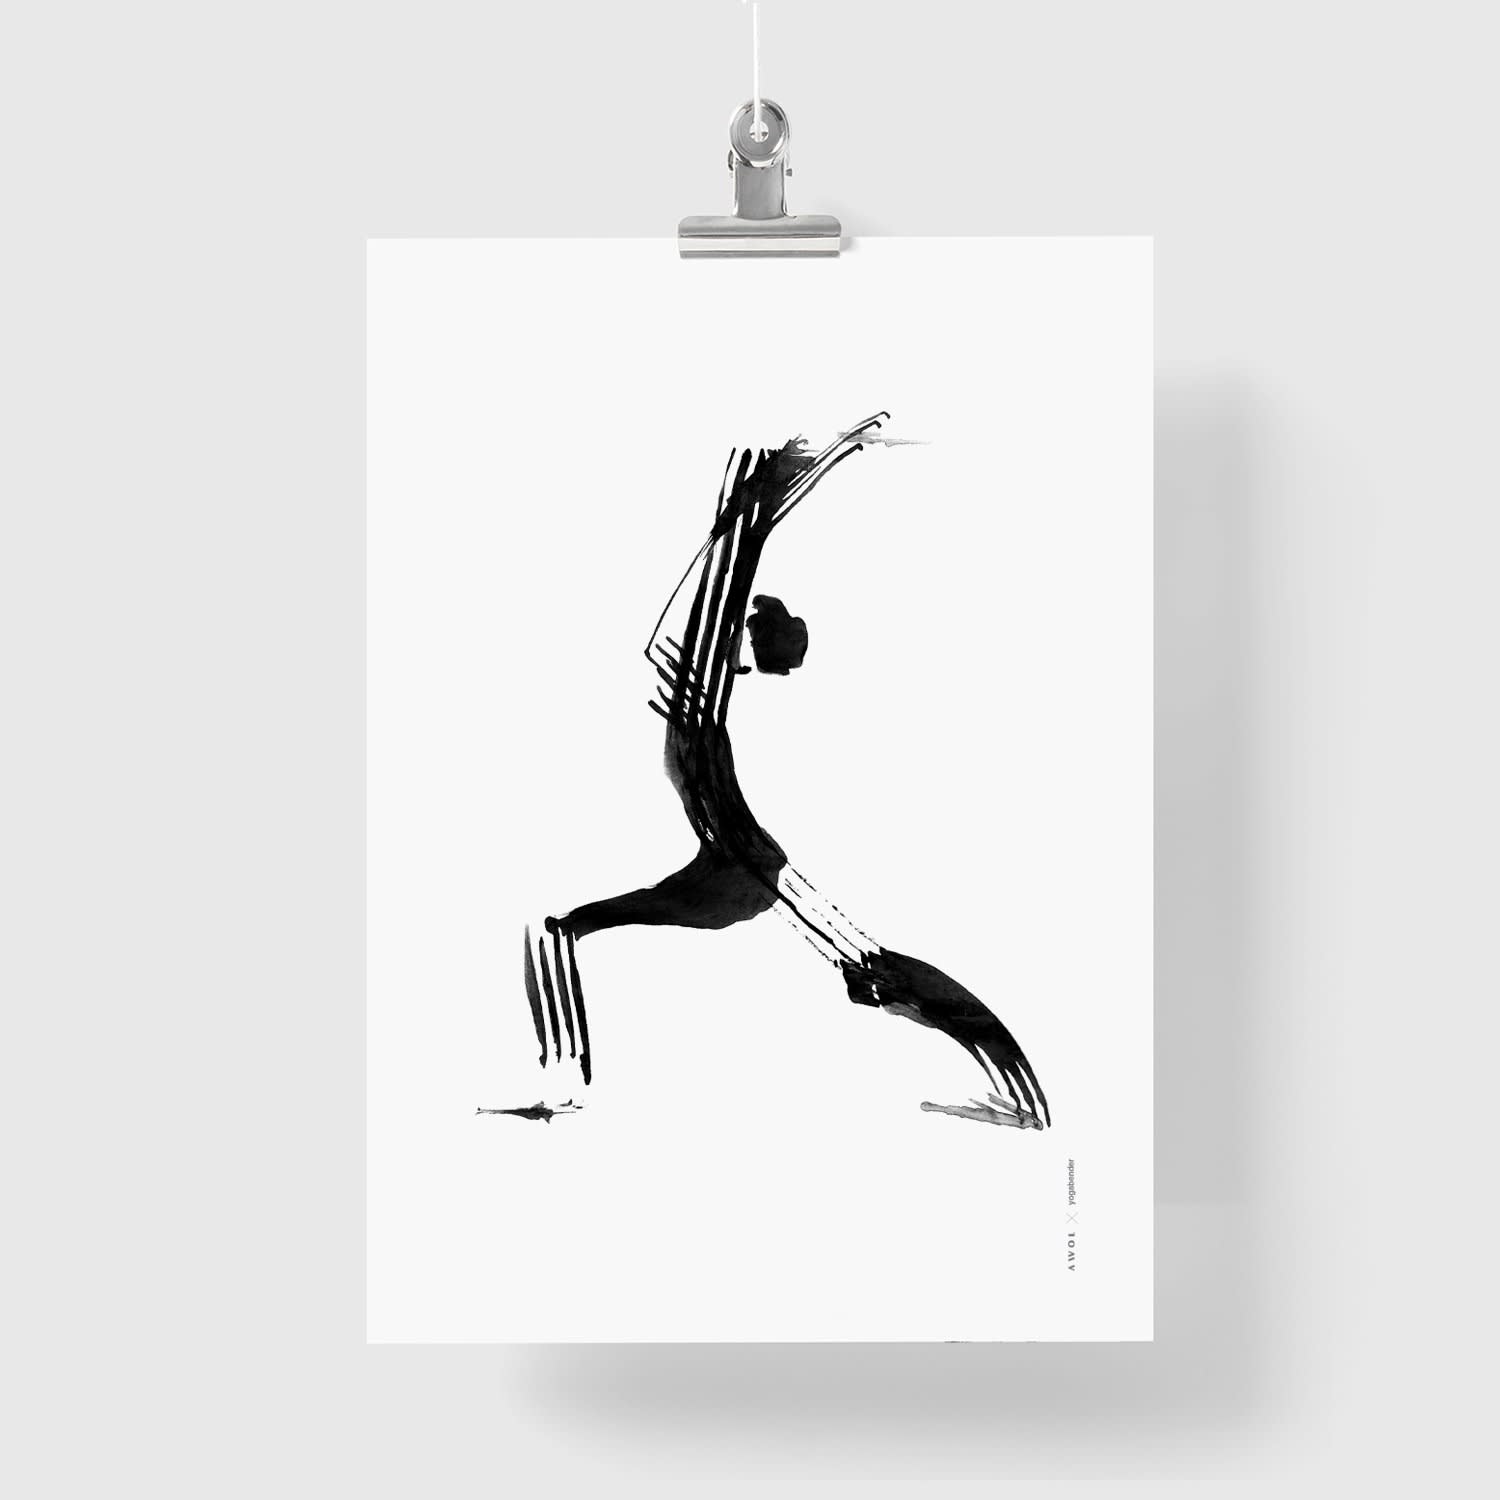 Funny Yoga Art Print With Woman In Yoga Pose Pouring A Bottle Of